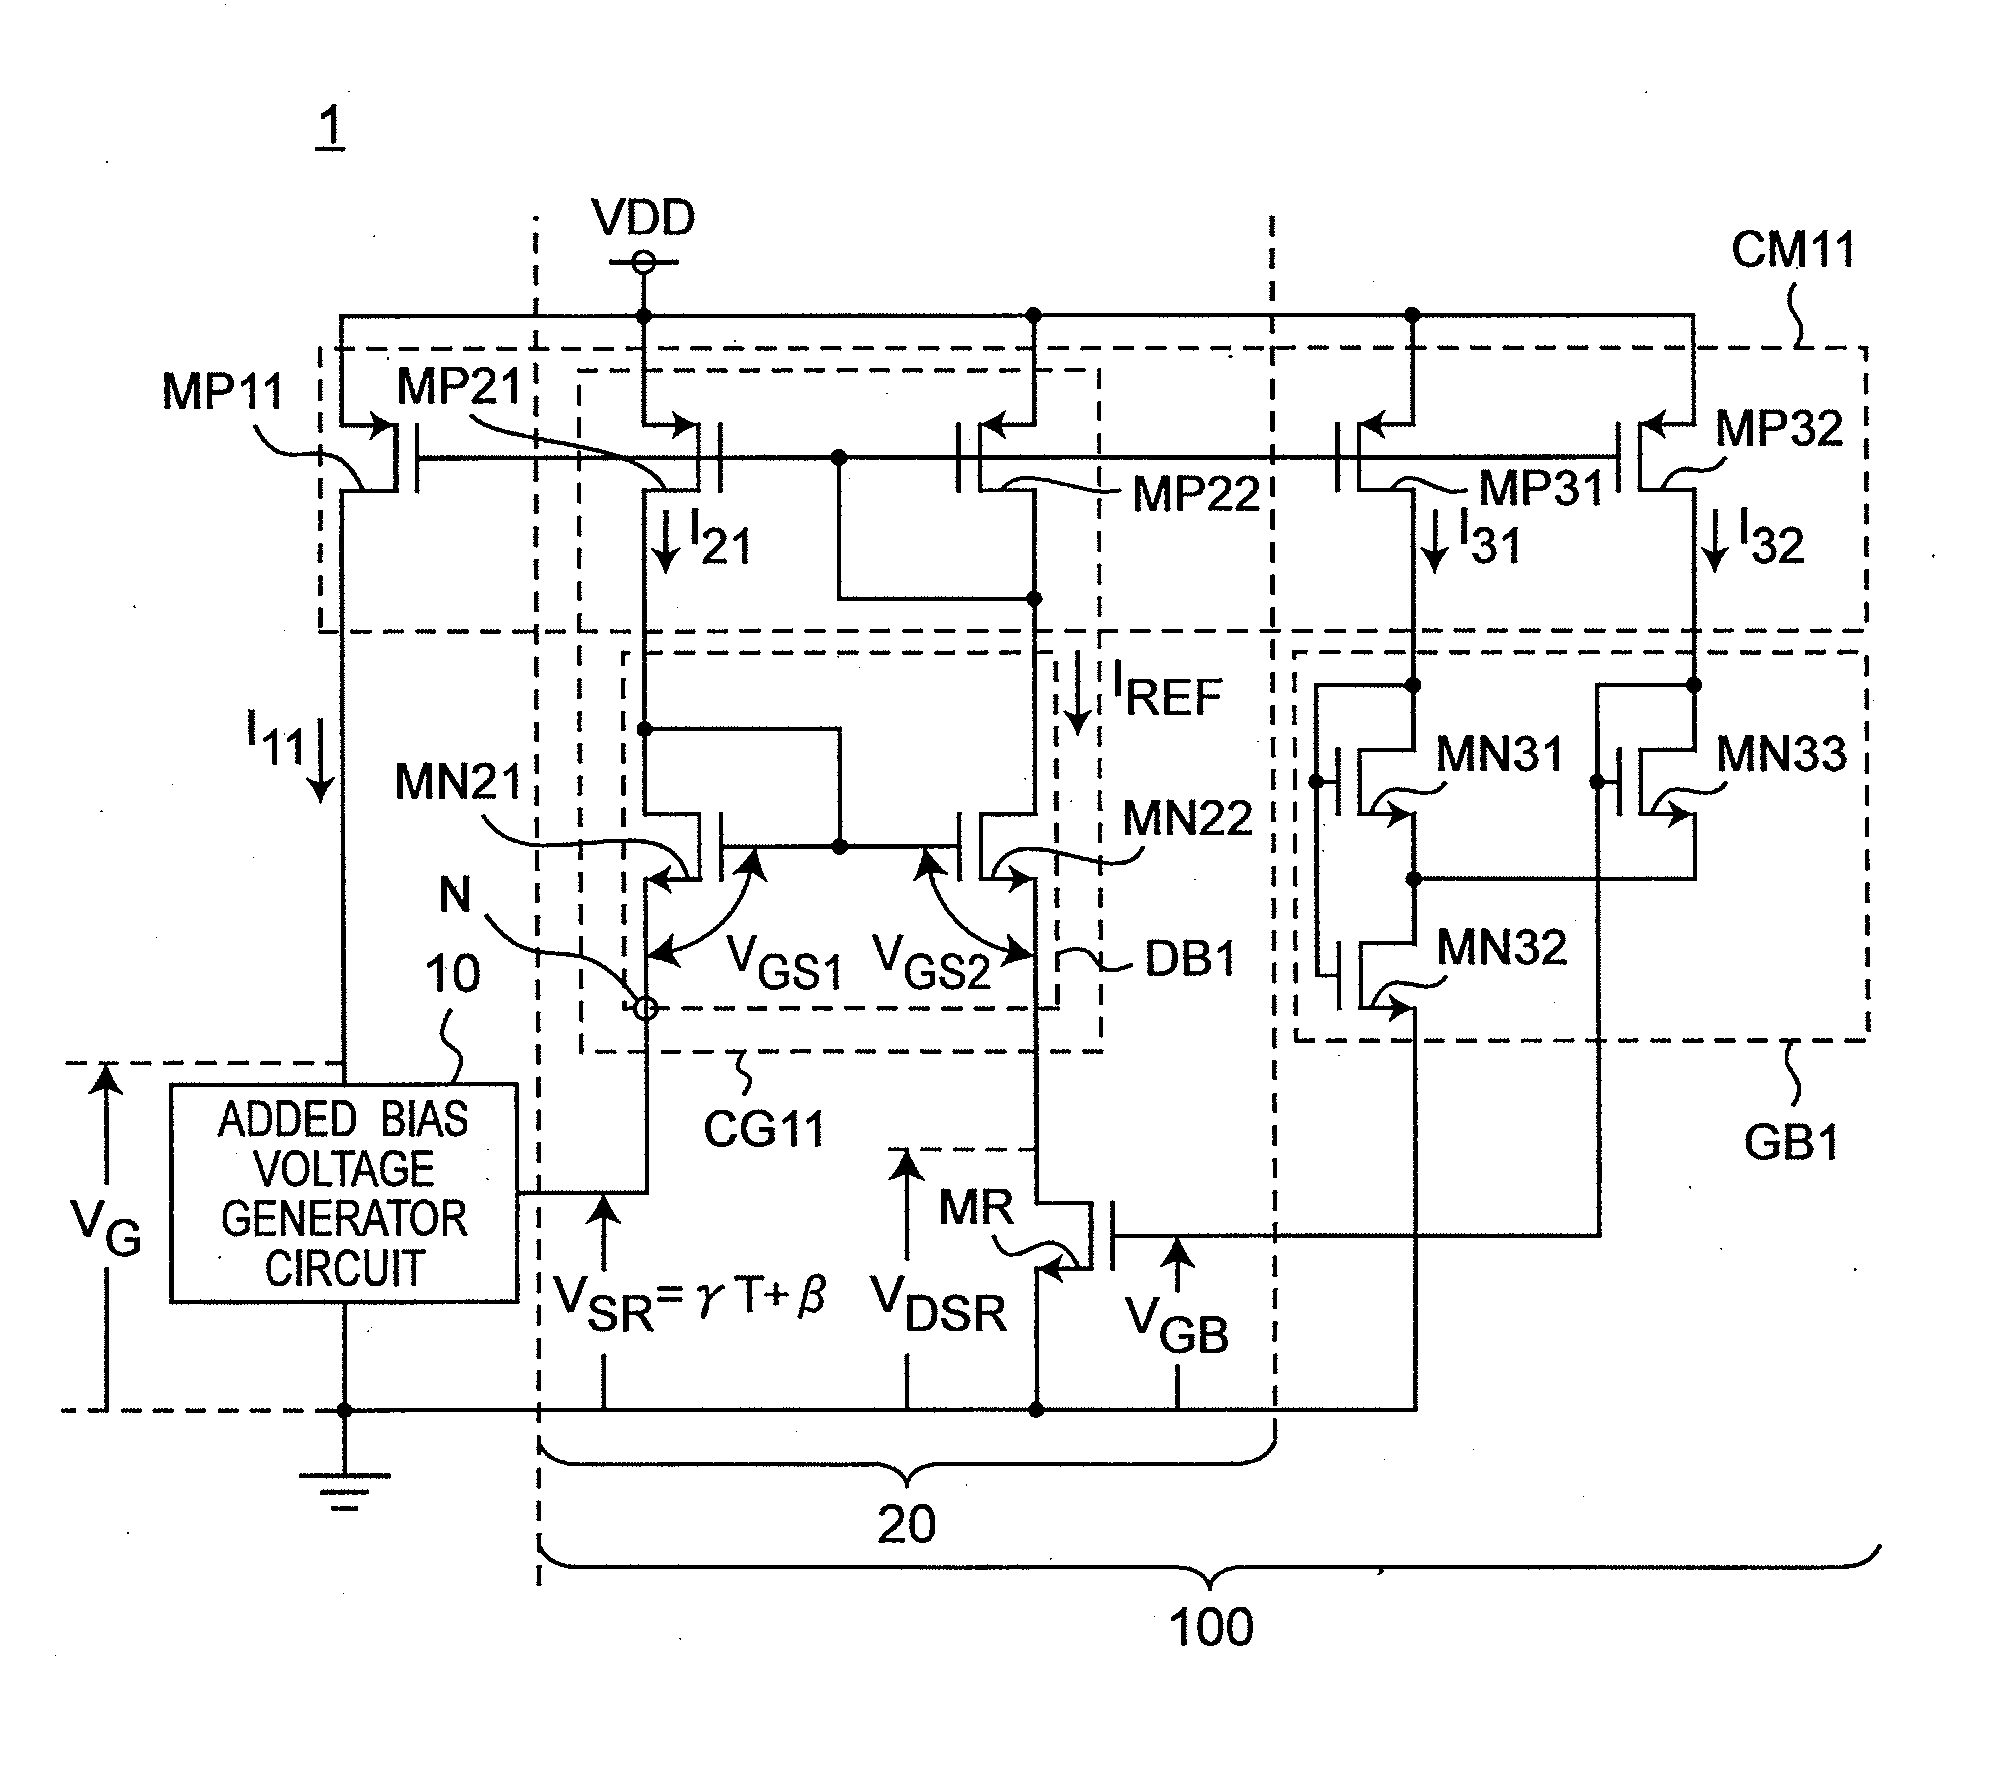 Reference current source circuit including added bias voltage generator circuit